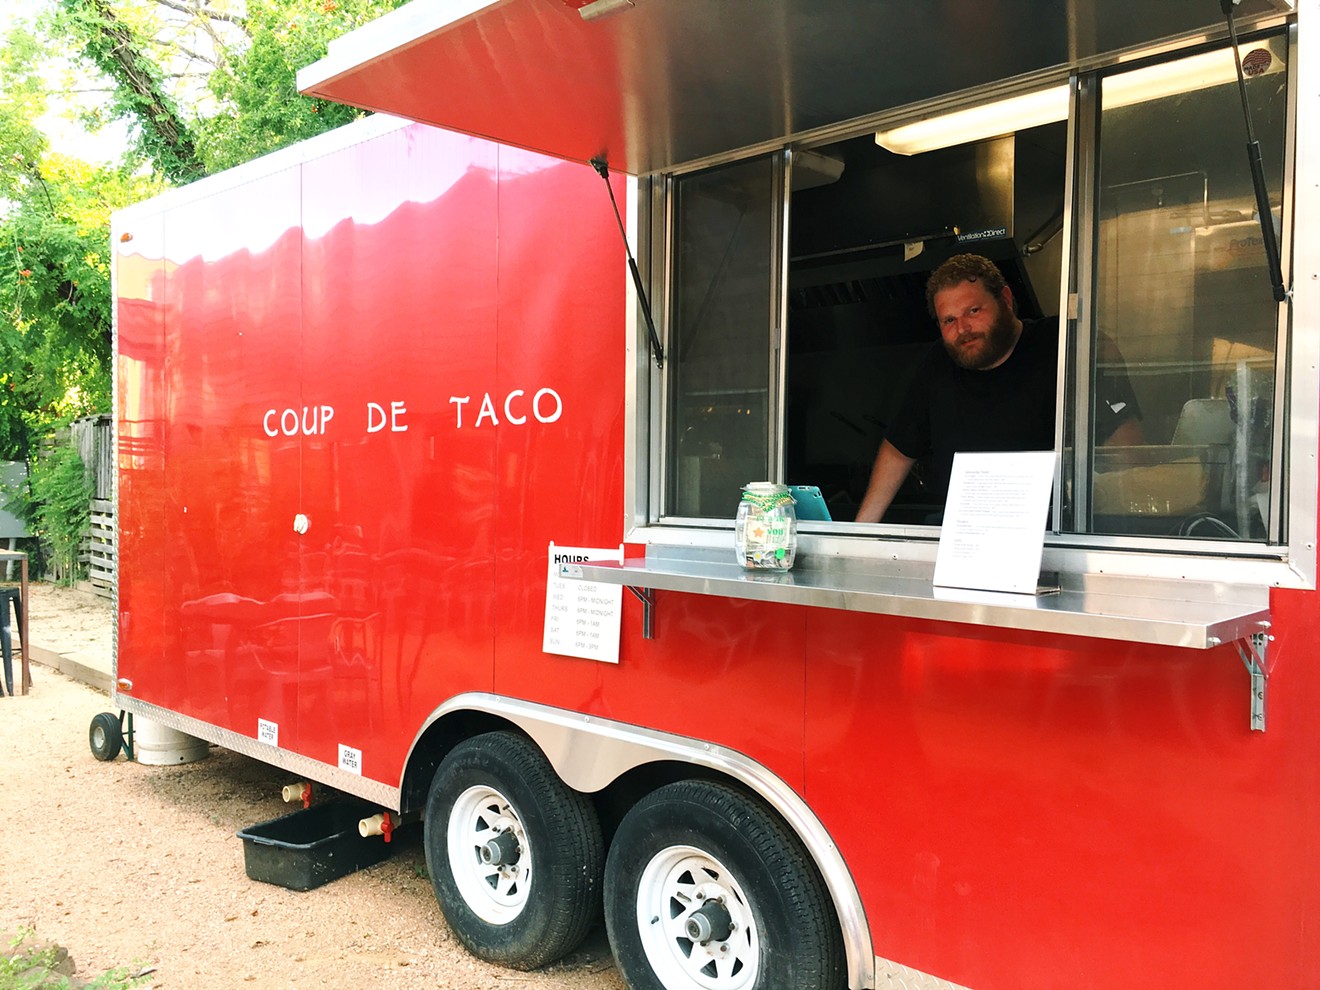 Coup D'etaco owner Josh Lang is getting out of the food truck business after running Harvest House's resident taco truck for two years.